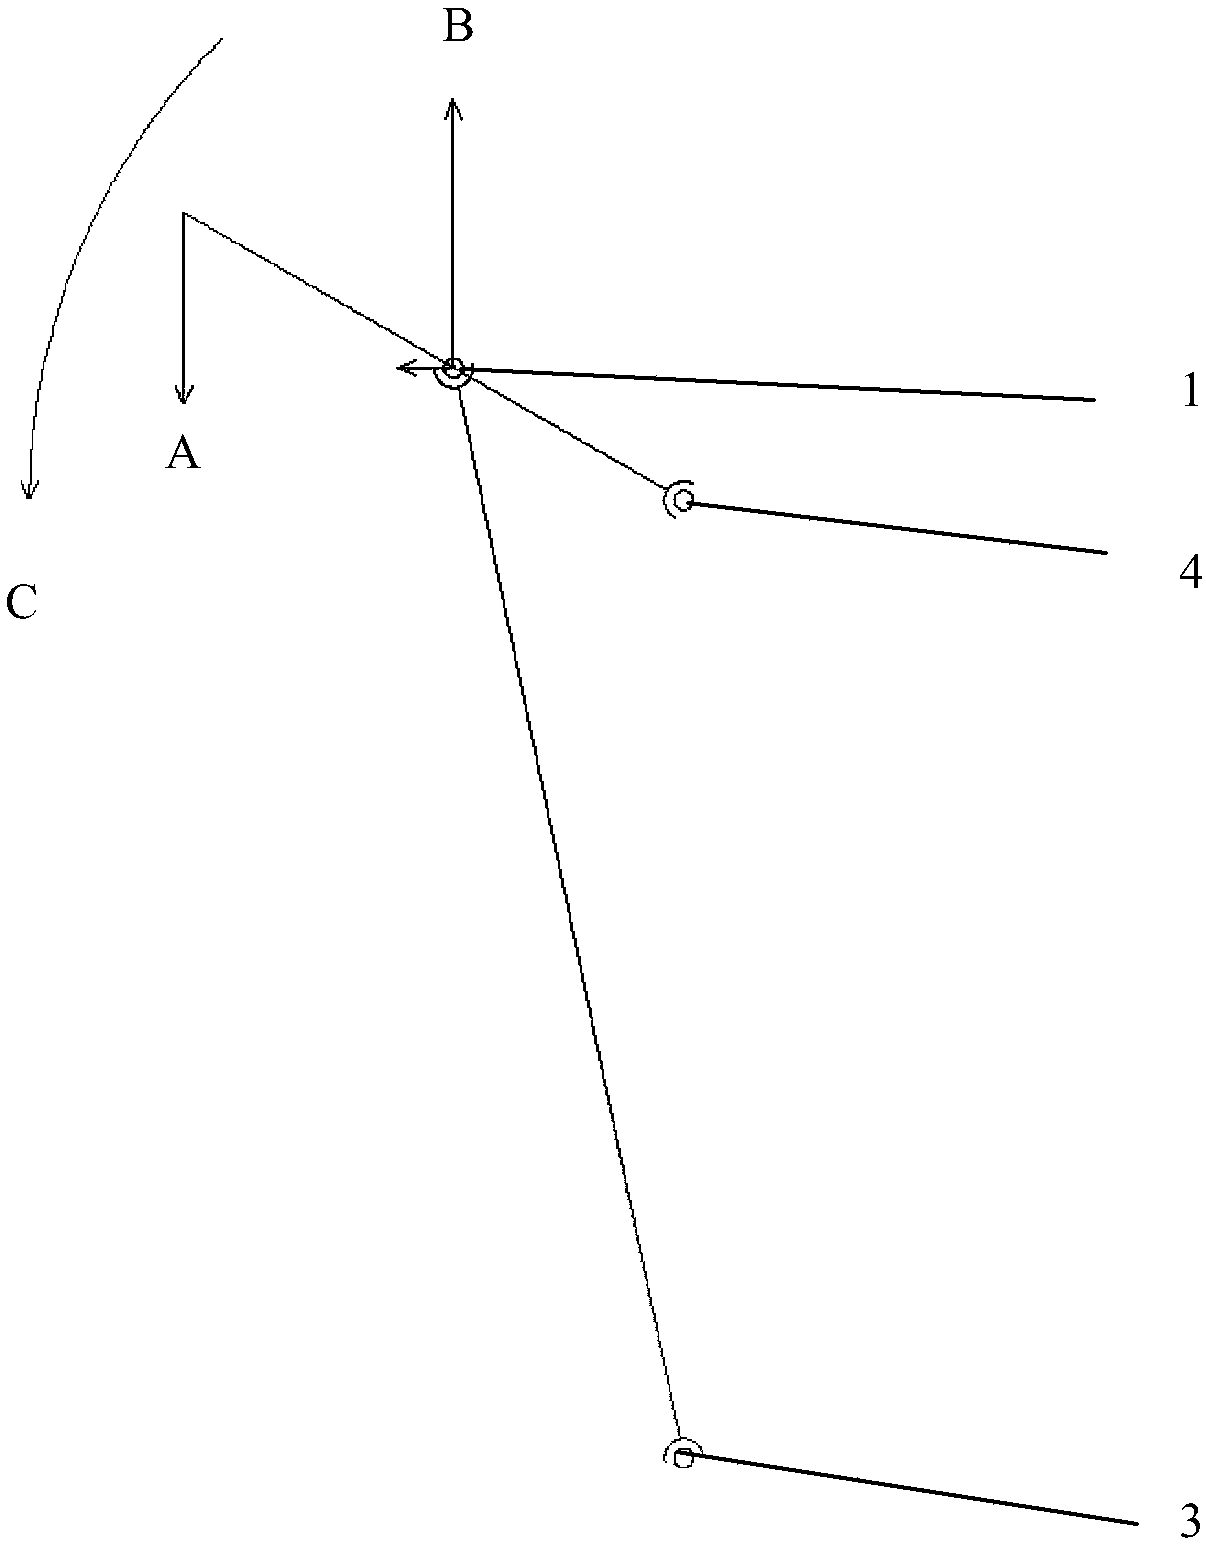 A mechanism for compensating the gravitational moment generated by vertically rotating parts